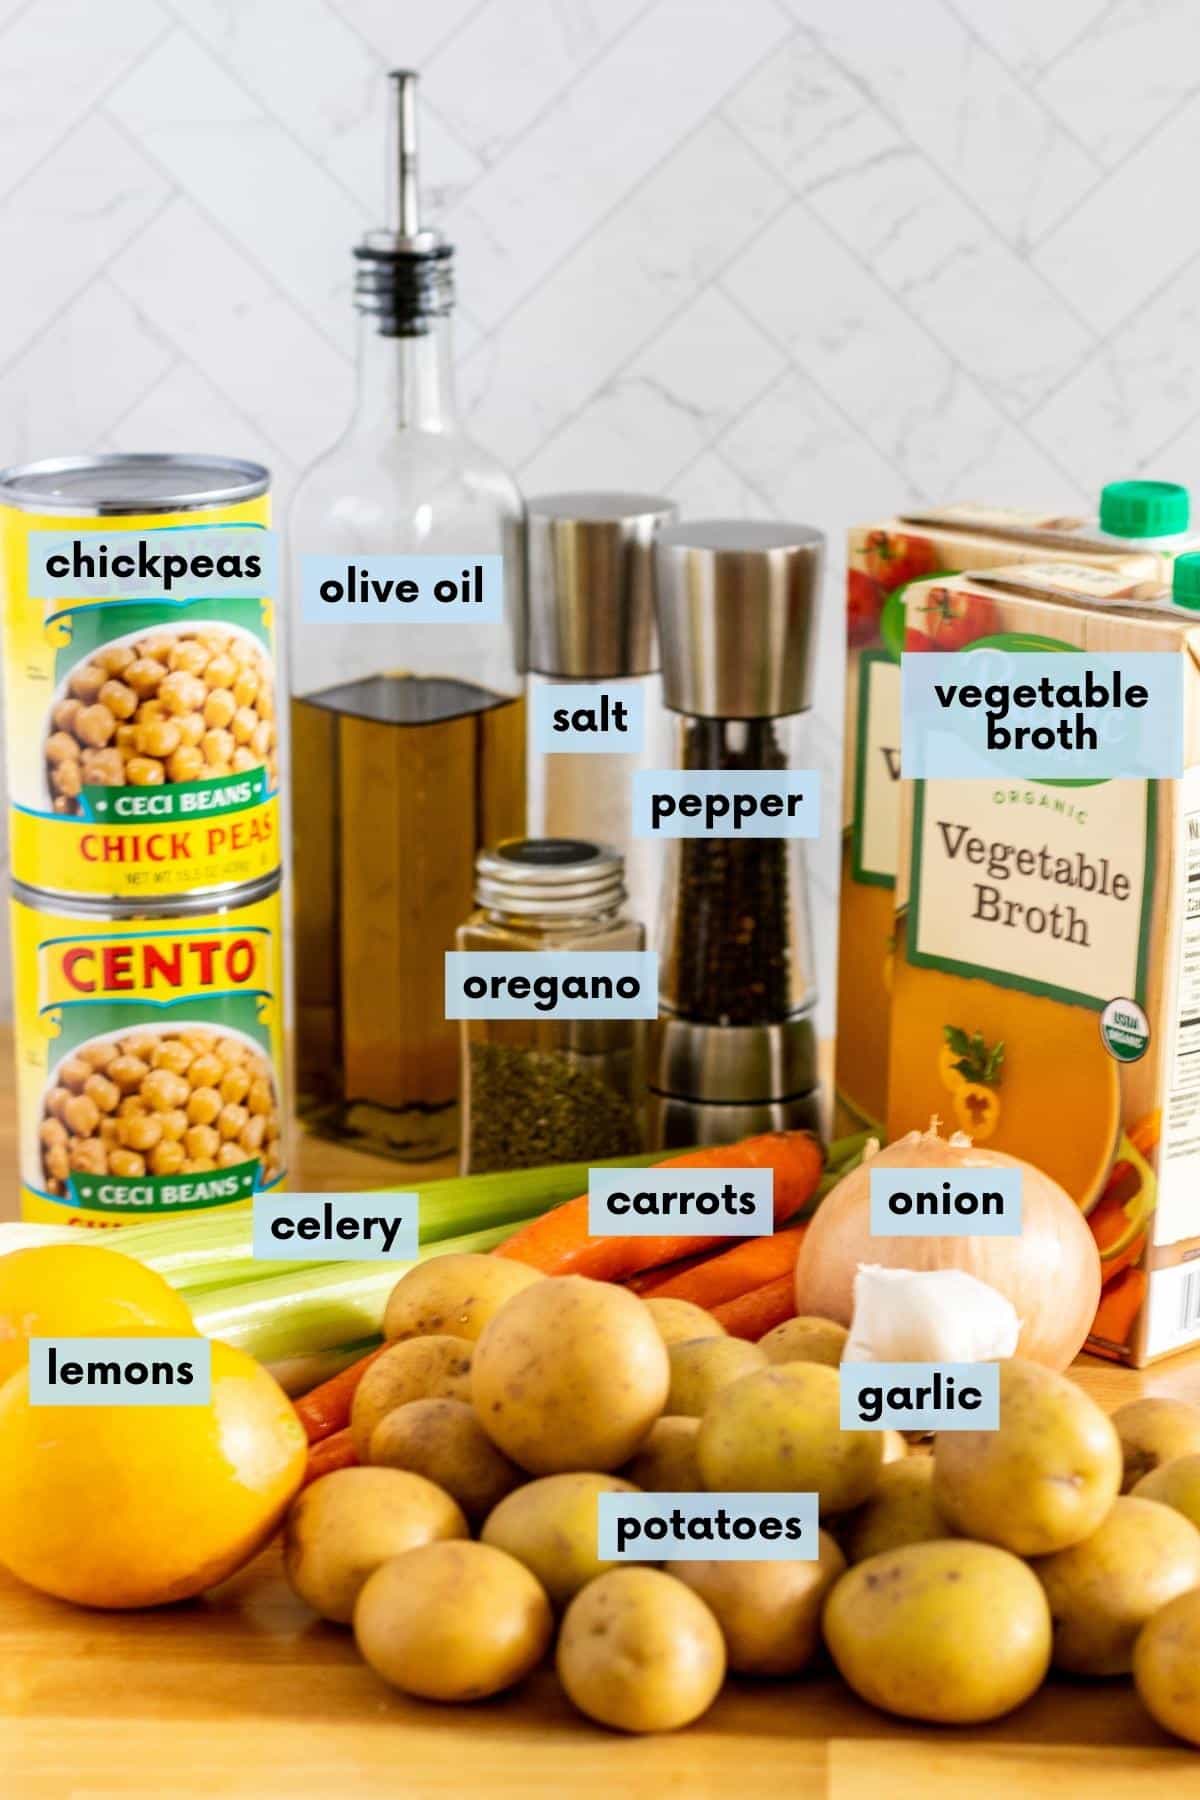 Potatoes, lemons, celery, carrots, onion, garlic, cans of chickpeas, bottle of olive oil, jar of dried oregano, salt and pepper grinders, and boxes of vegetable broth on a kitchen counter.